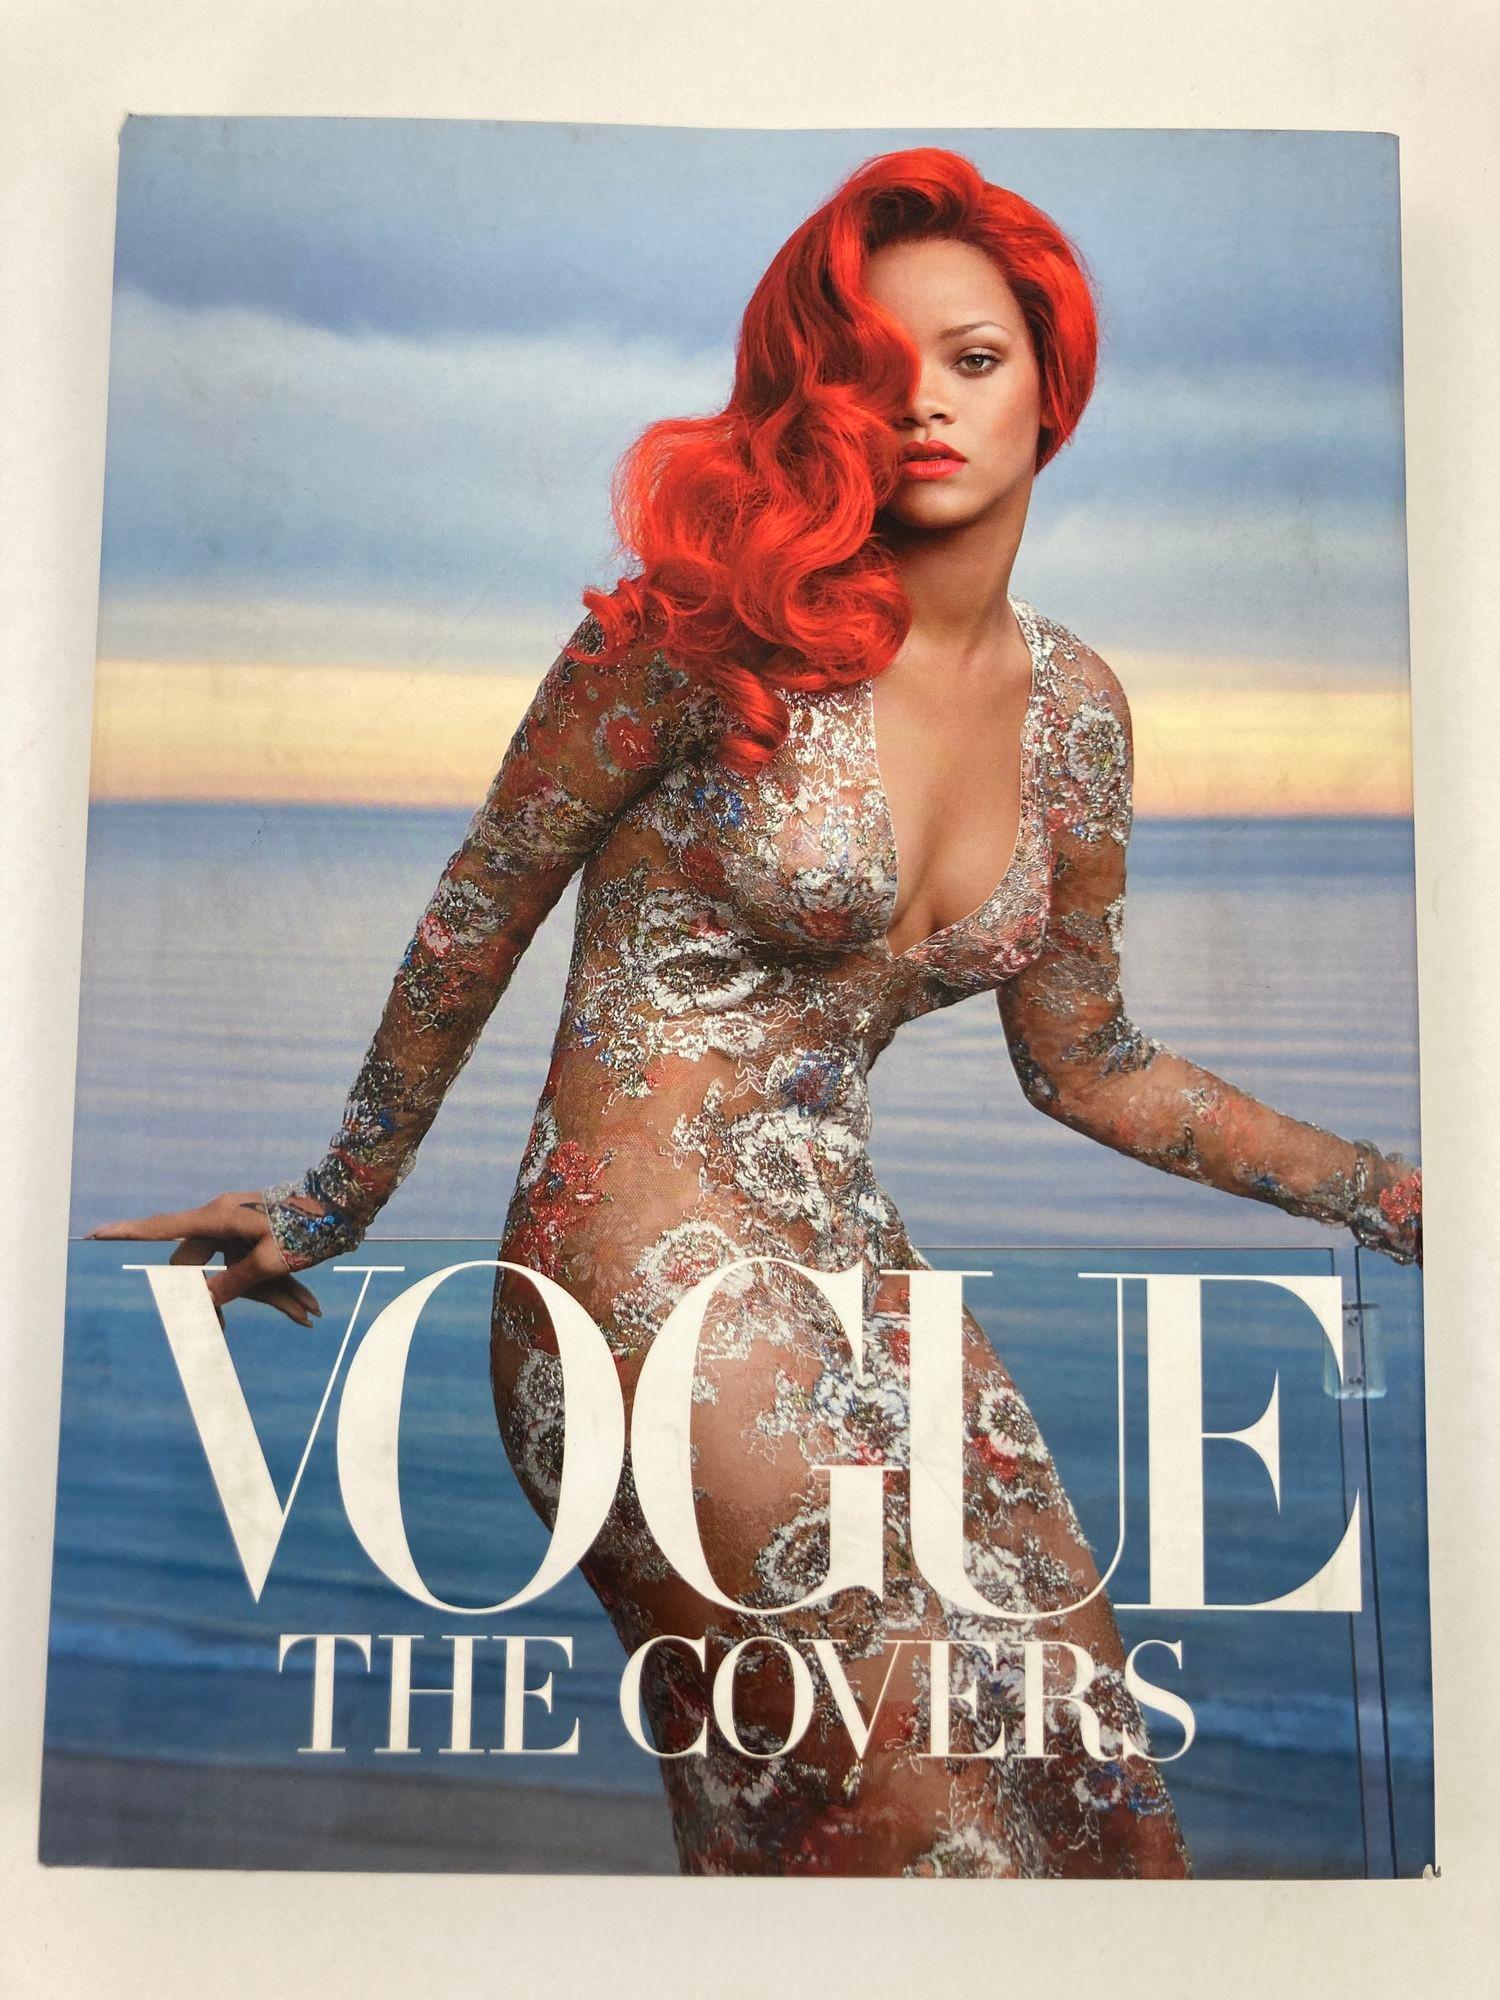 Vogue The Covers Hardcover Coffee Table Book.
From Gallery Met founder and author Dodie Kazanjian, this stunning updated edition of Vogue: The Covers continues to pay tribute to its tradition of beauty and excellence with a compilation of even more